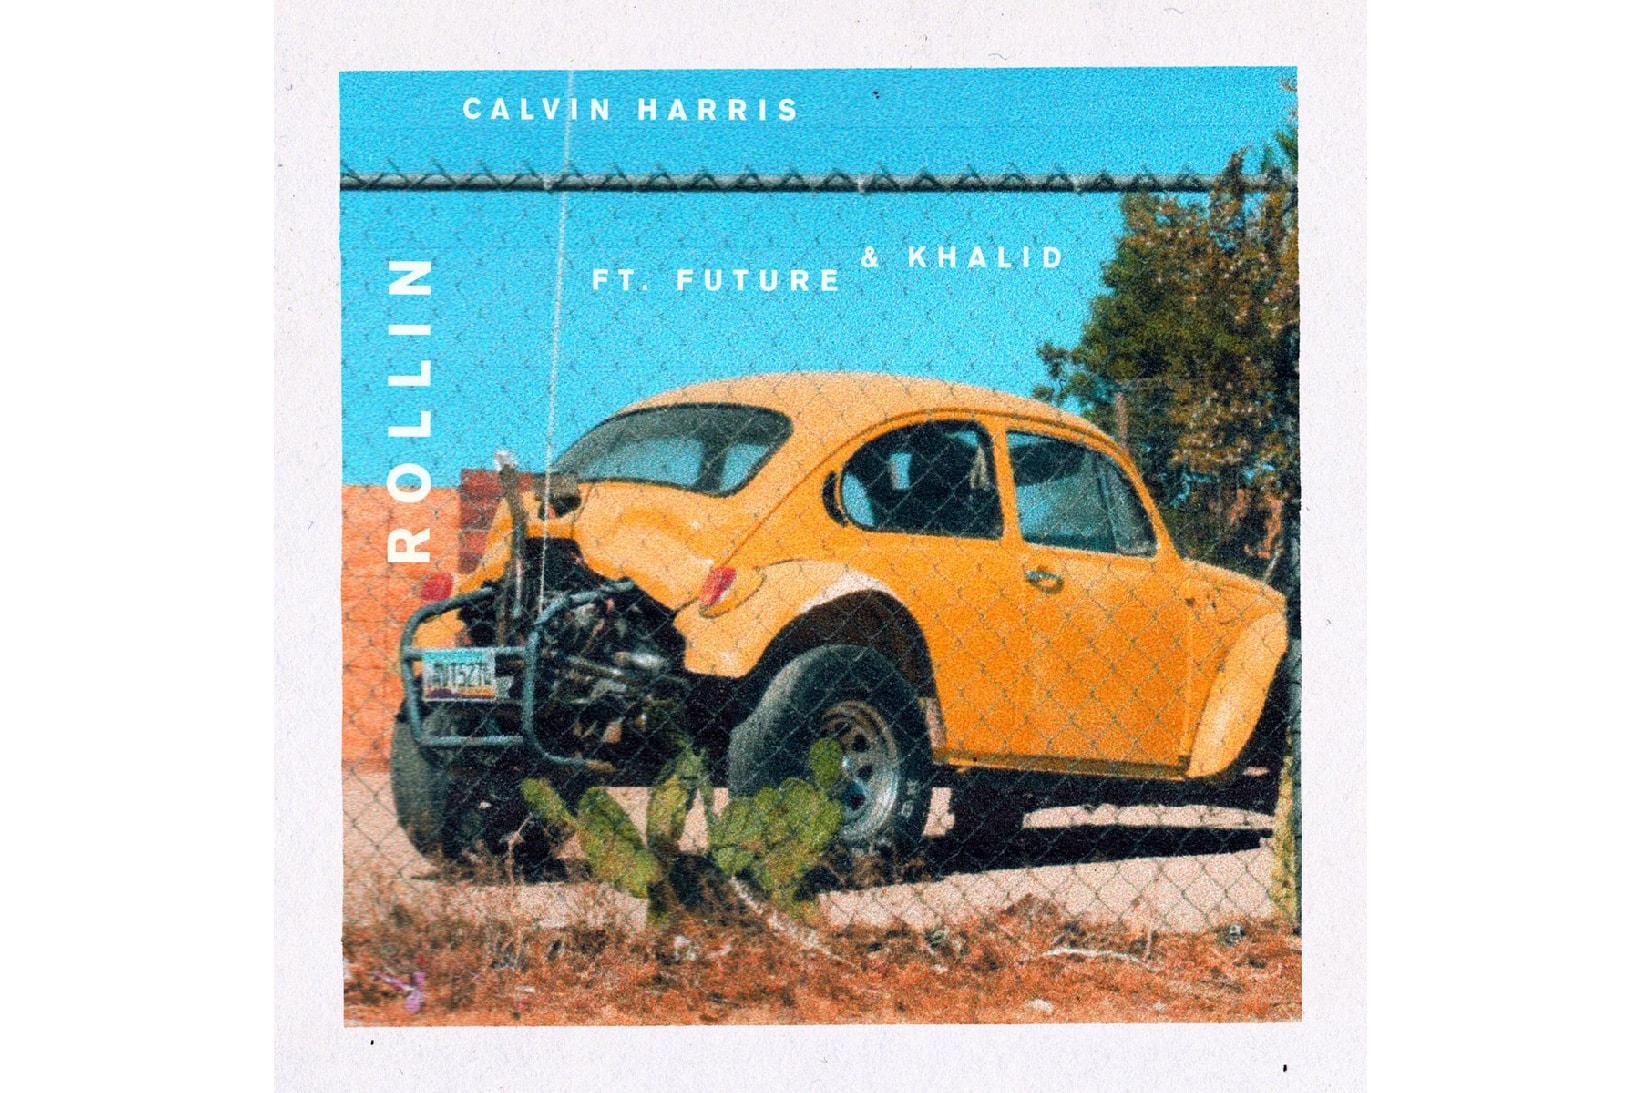 Calvin Harris Announces "Rollin" Single Featuring Future and Khalid, Dropping Friday, May 12.